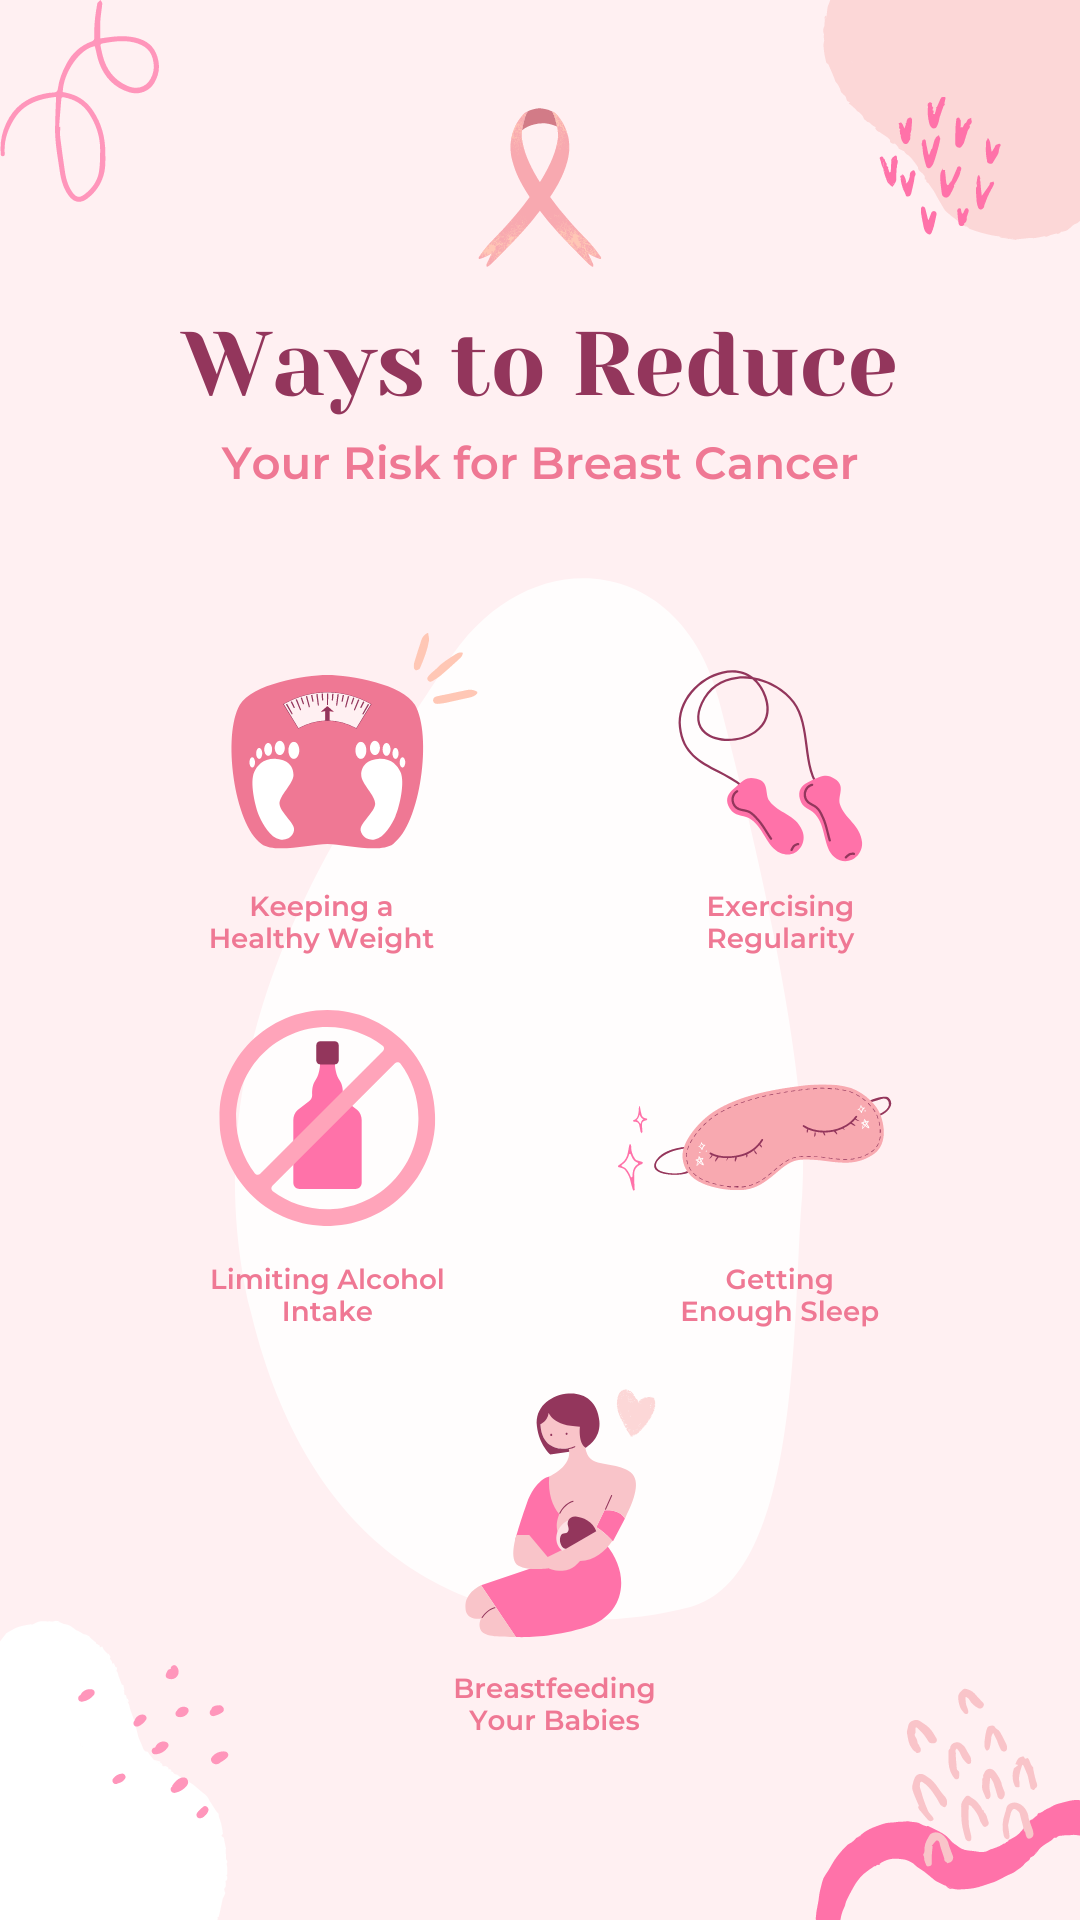 Reducing fear and anxiety associated with breast cancer screening